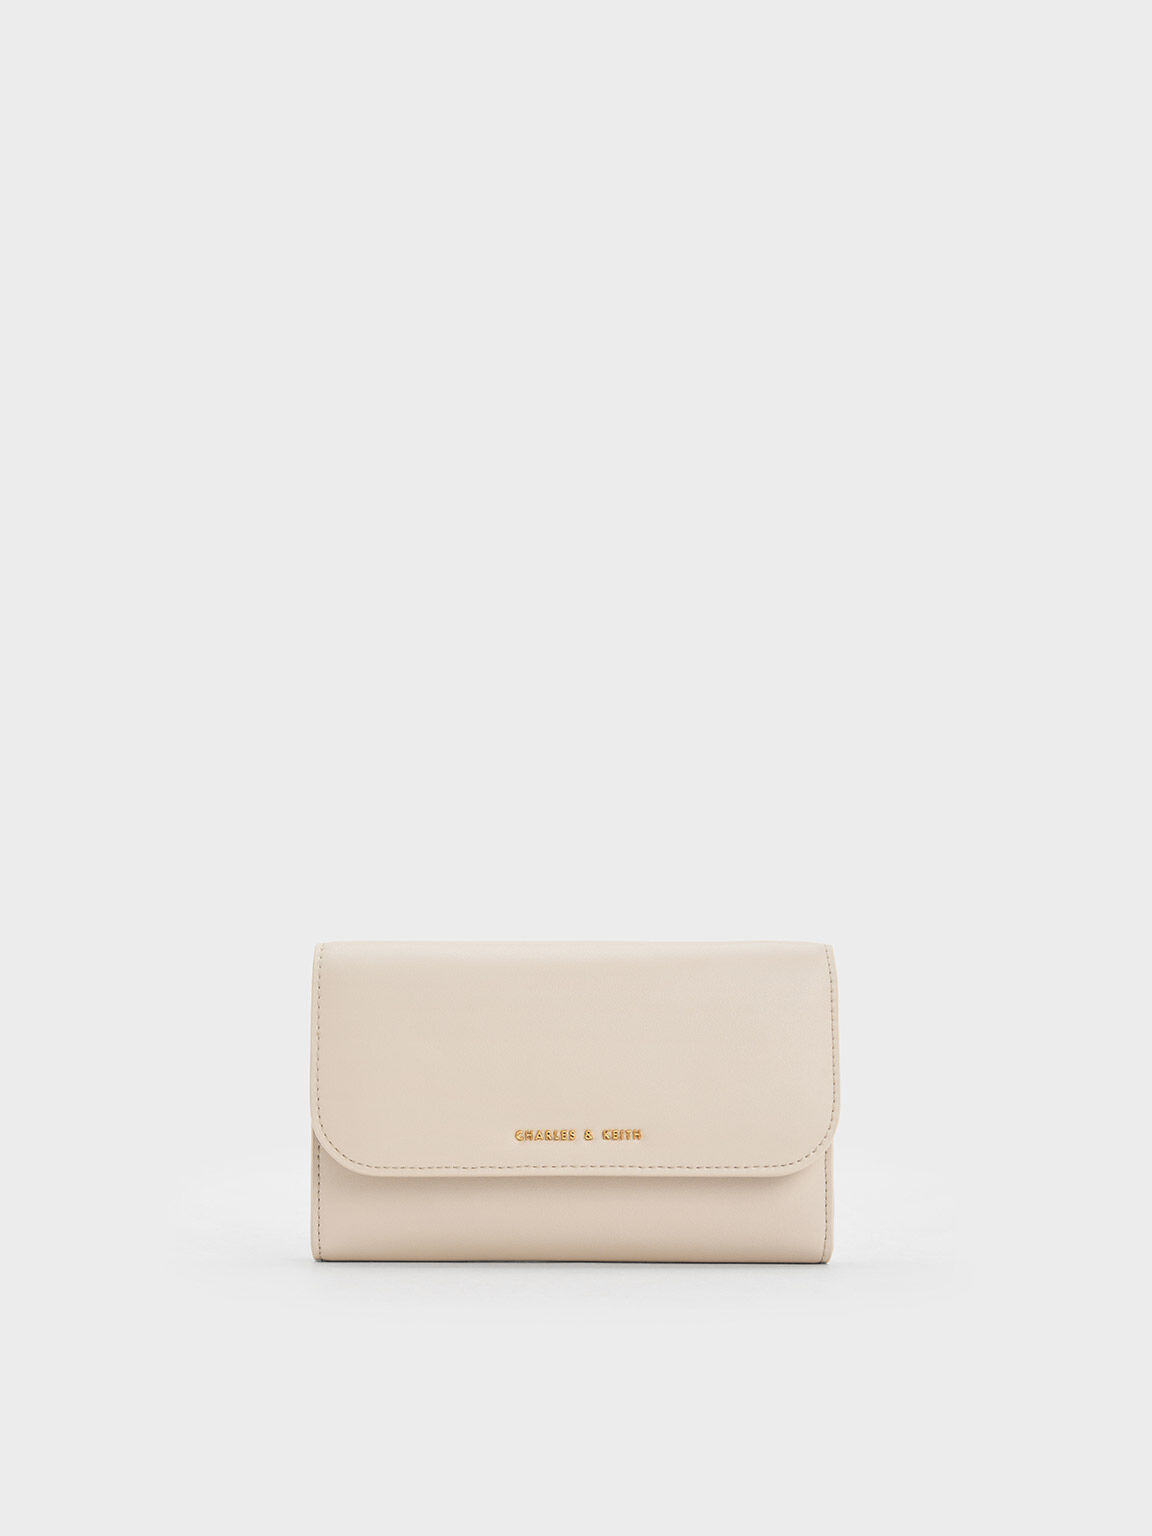 Charles & Keith Women's Front Flap Long Wallet